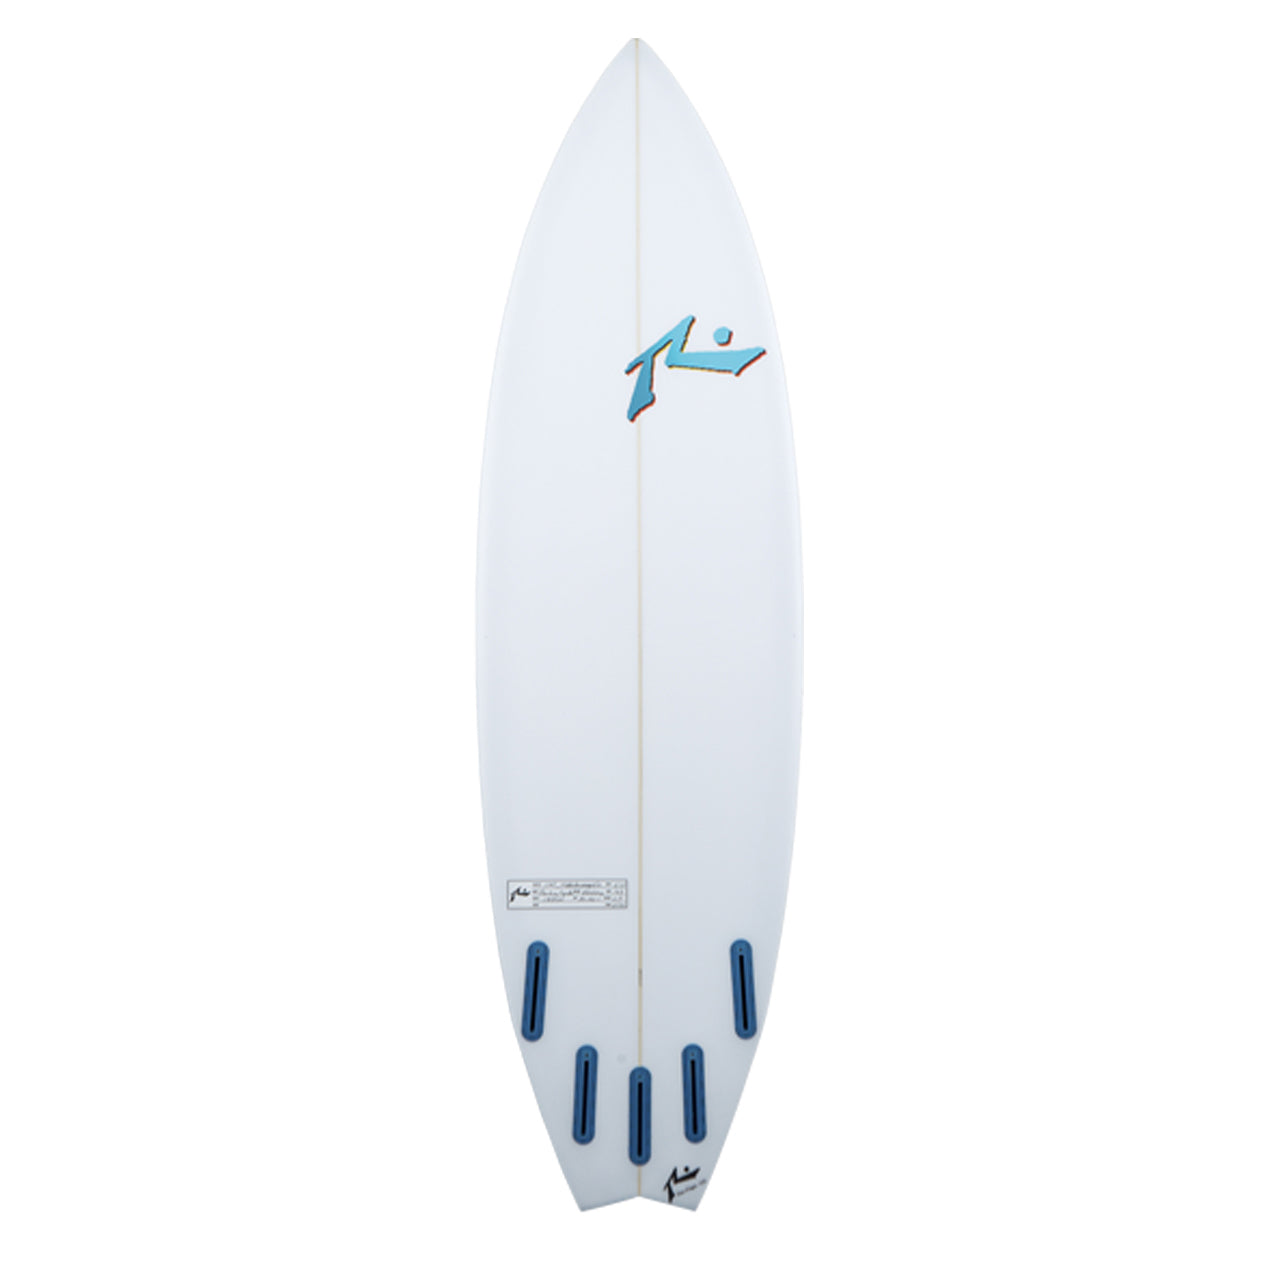 Barking Spider - High Performance Shortboard - Rusty Surfboards - Top View